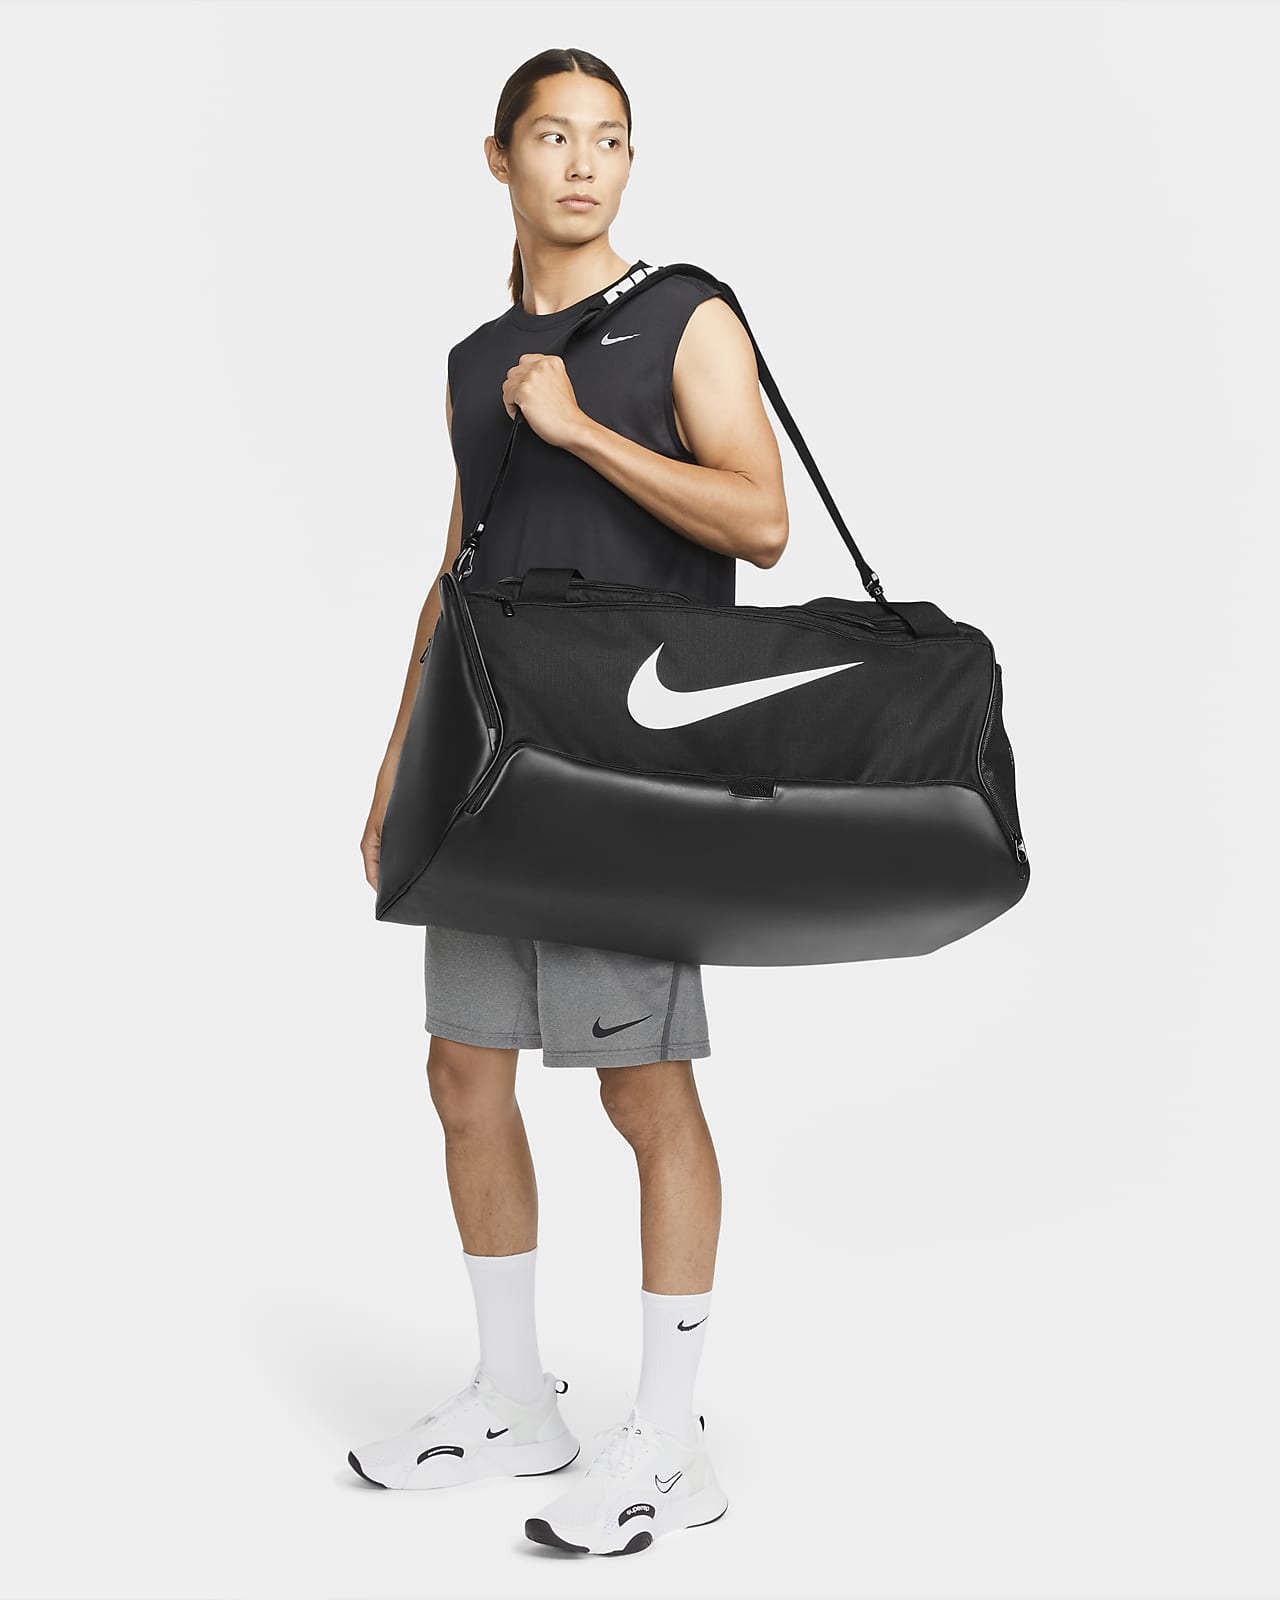 Nike Brasilia 95 Training Duffel Bag Grey / Orange The Nike Brasilia Duffel  Bag keeps all your training gear at hand. A side compartment stores shoes  separately, while inside and outside pockets